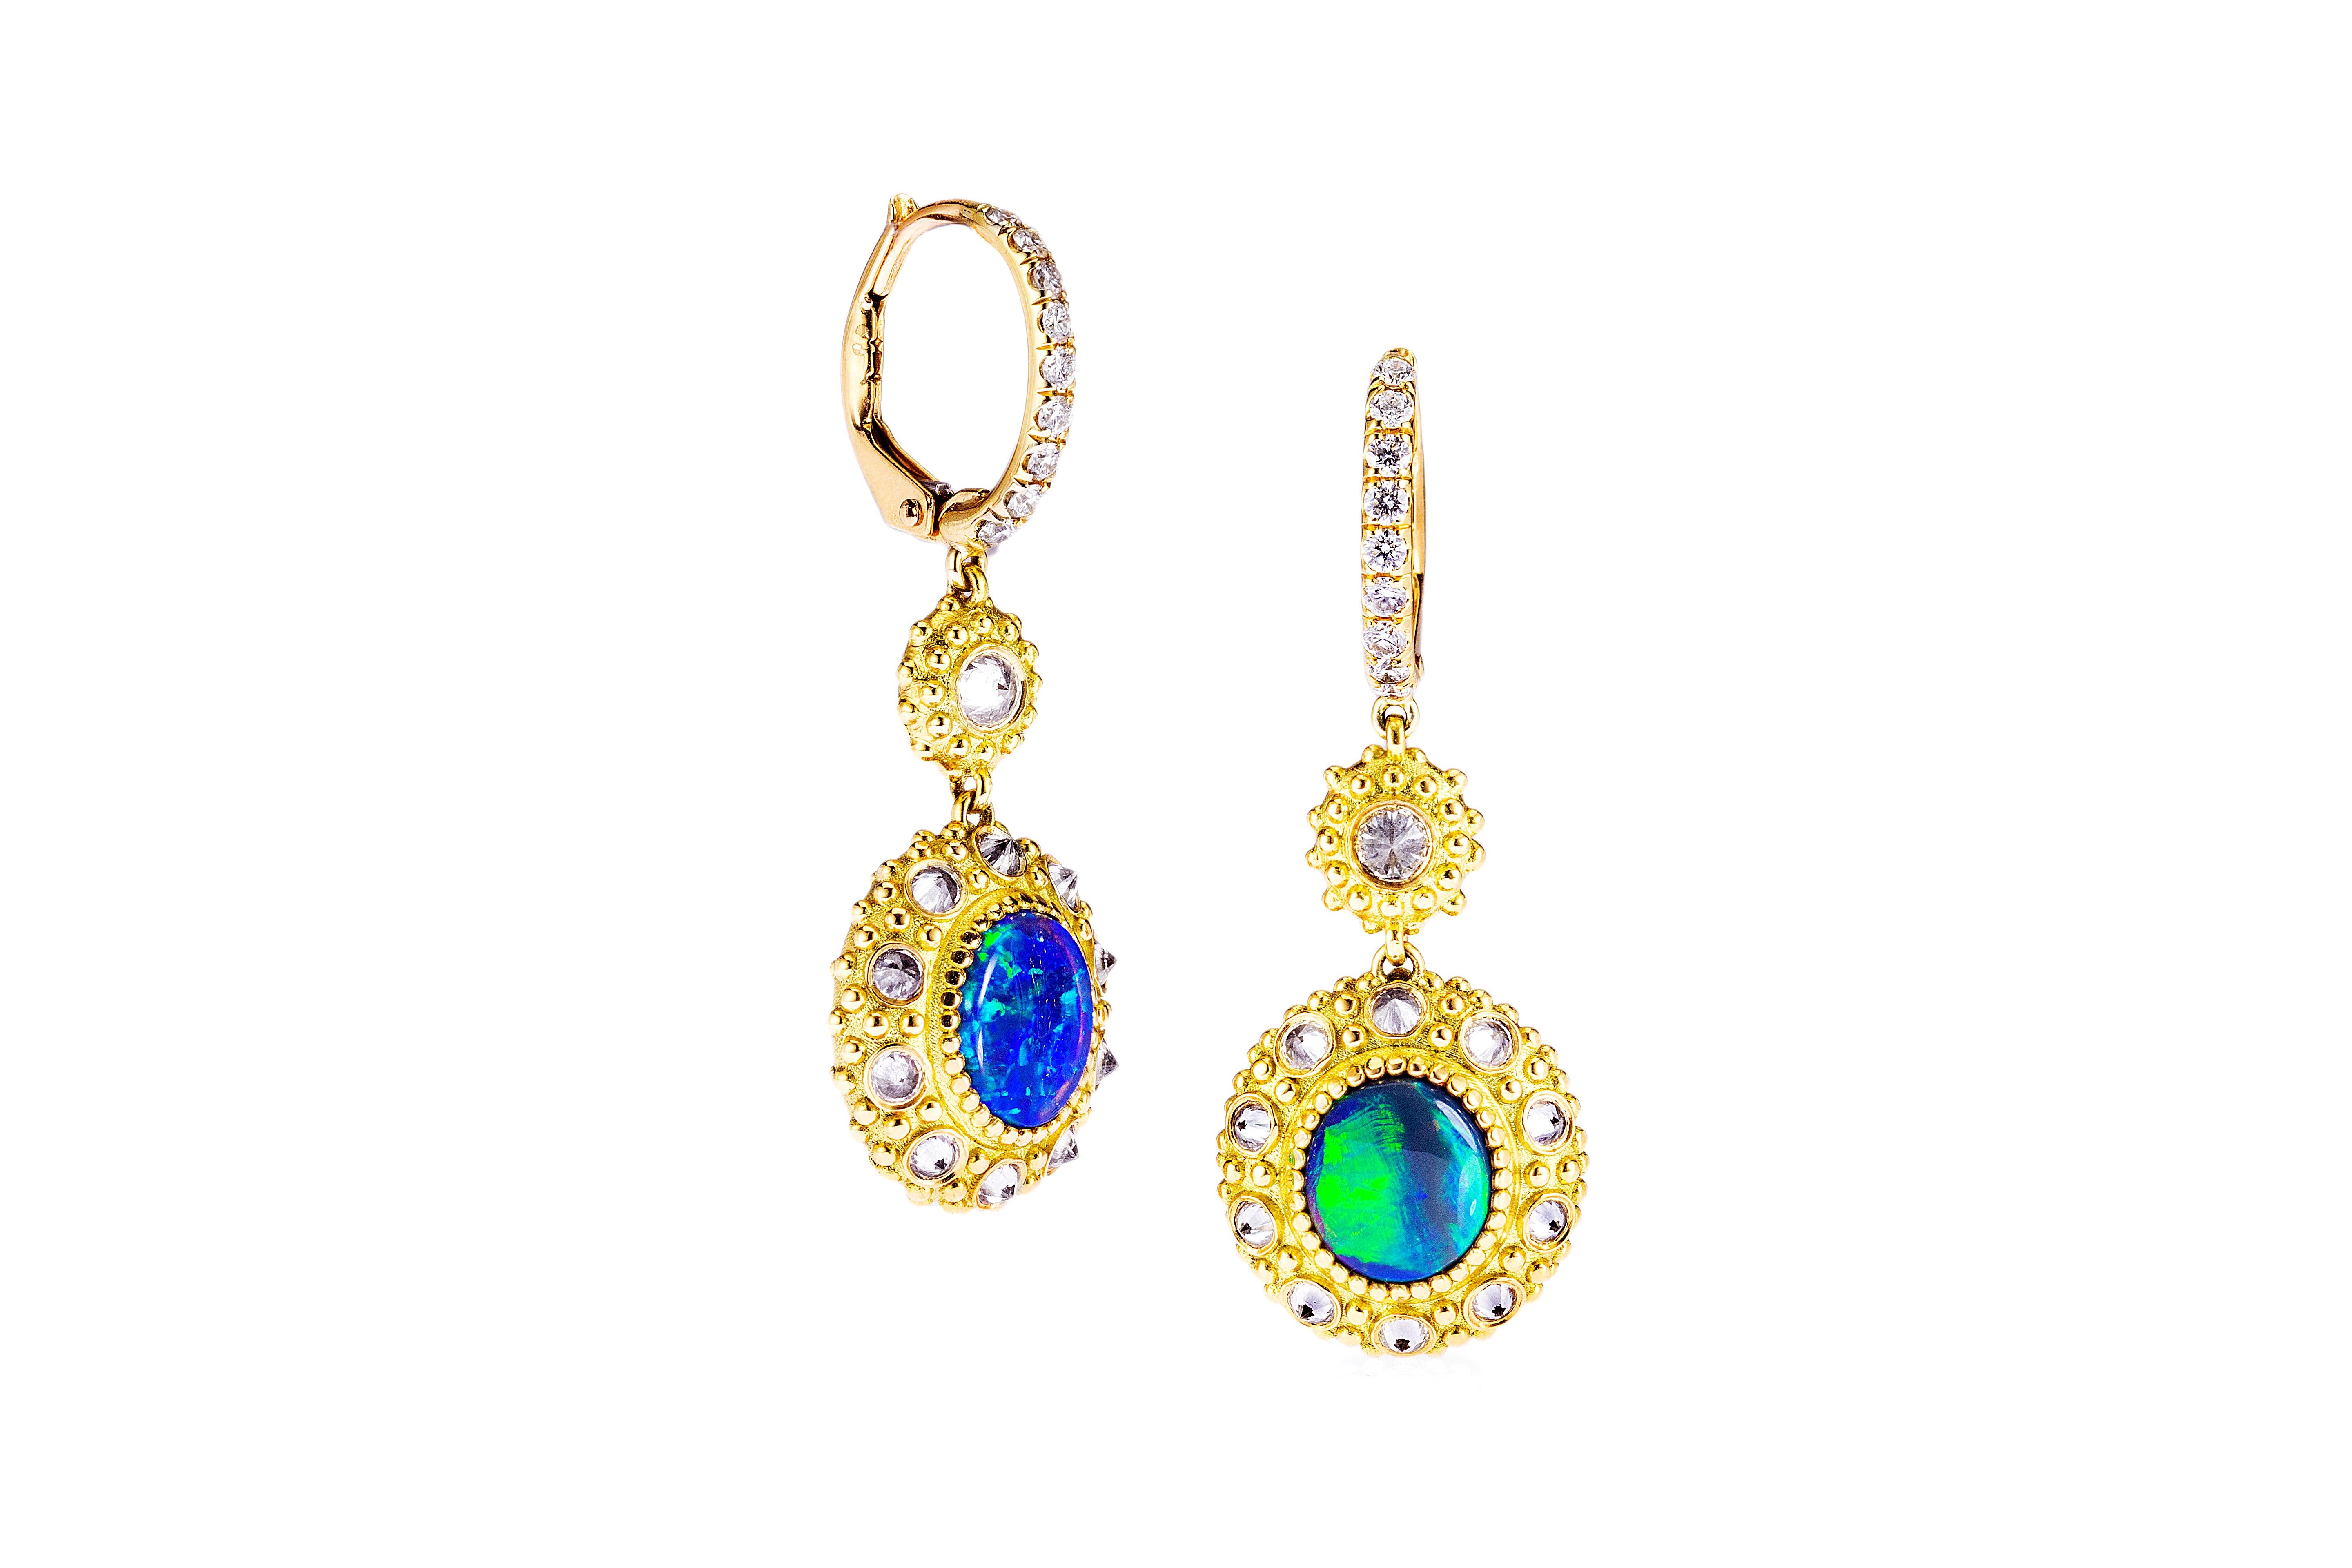 AnaKatarina’s ‘Sunday kind of Love’ ‘Earrings are an homage to the beautiful sea urchin and its totem of intuition and evolution. This beautiful work of art is one-of-a-kind. Lighting Ridge black opals adorn the center of the two sea urchins